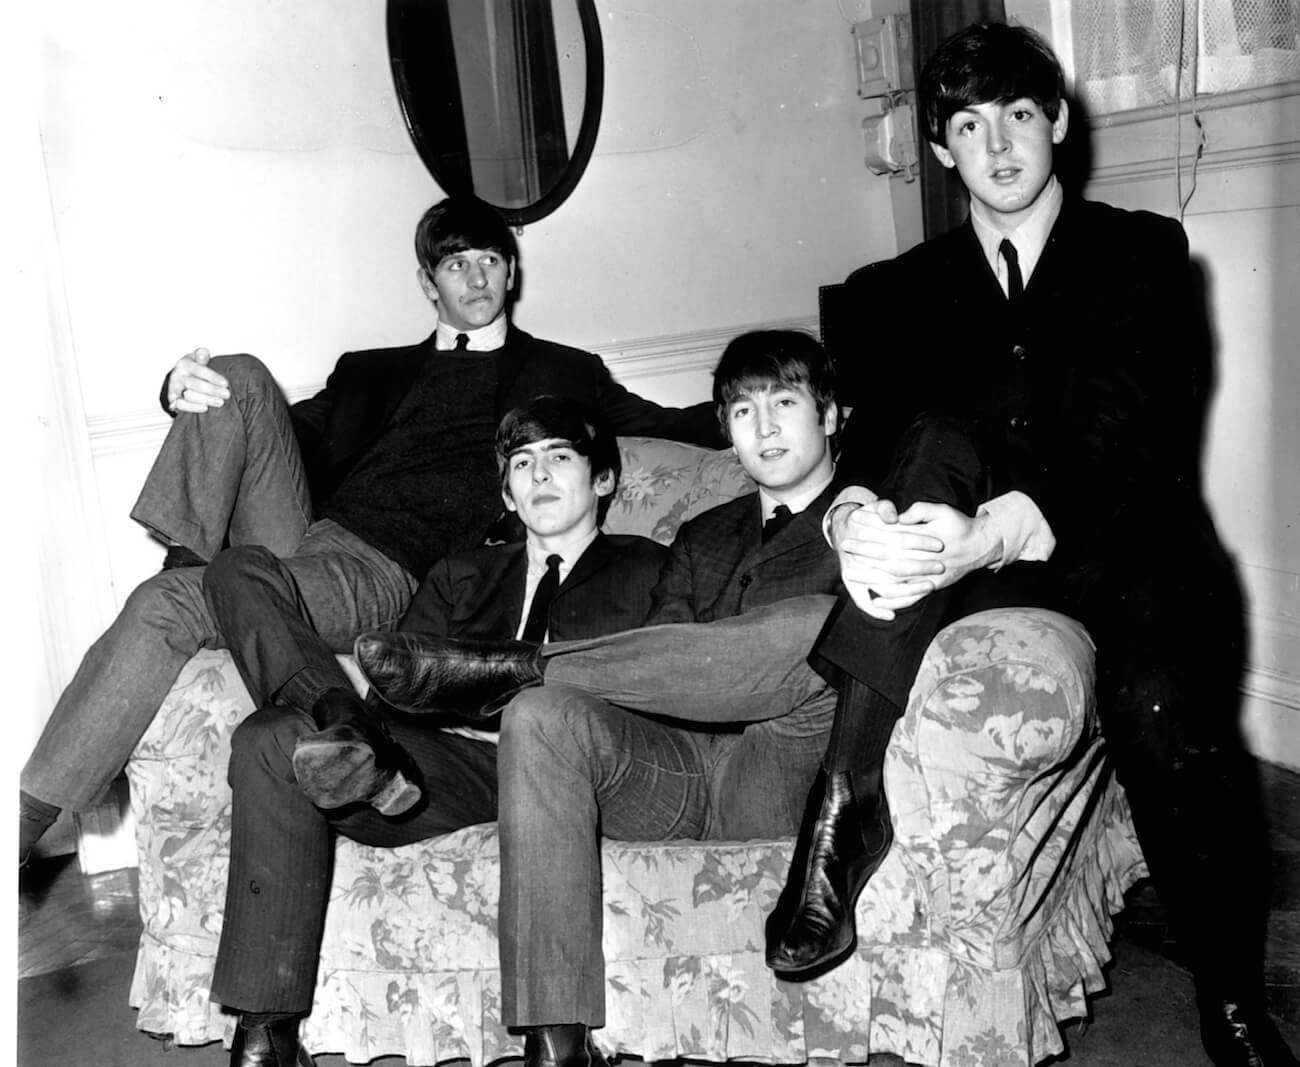 The Beatles in suits in 1964.